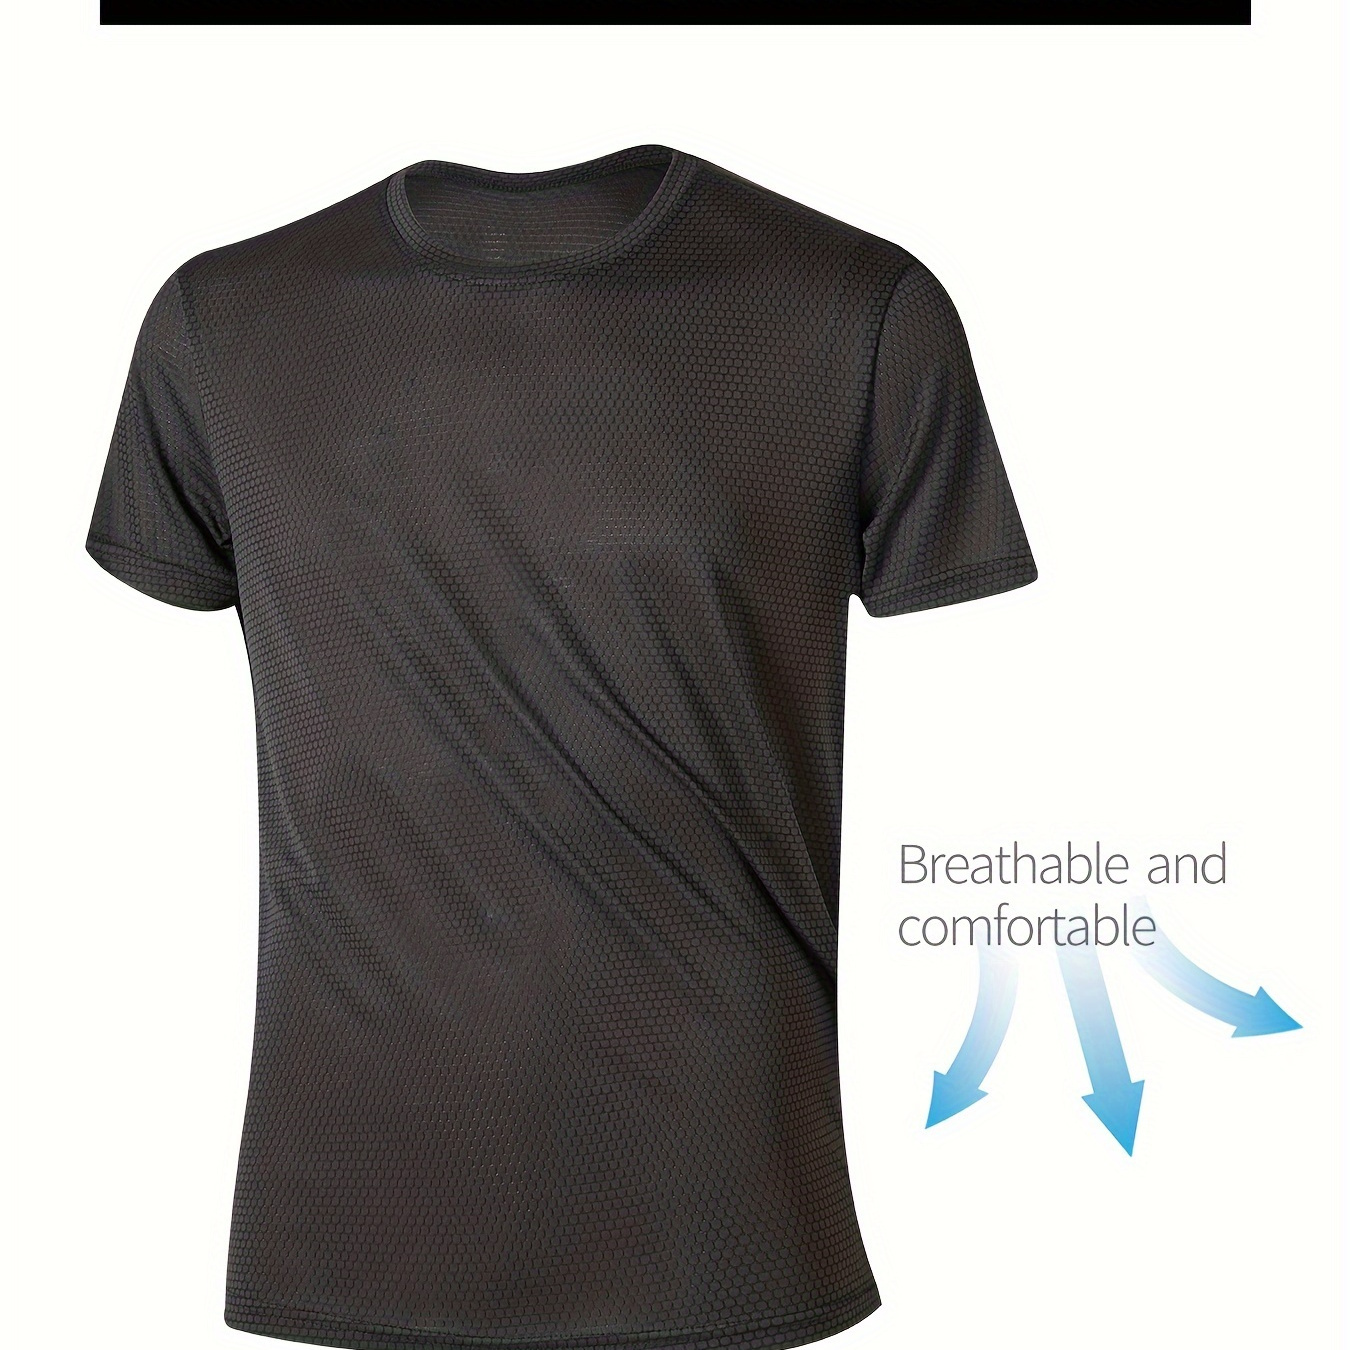 

Solid Men's Comfy Quick-drying Short Sleeve Round Neck T-shirt, Lightweight And Breathable, Summer Outdoor Sports